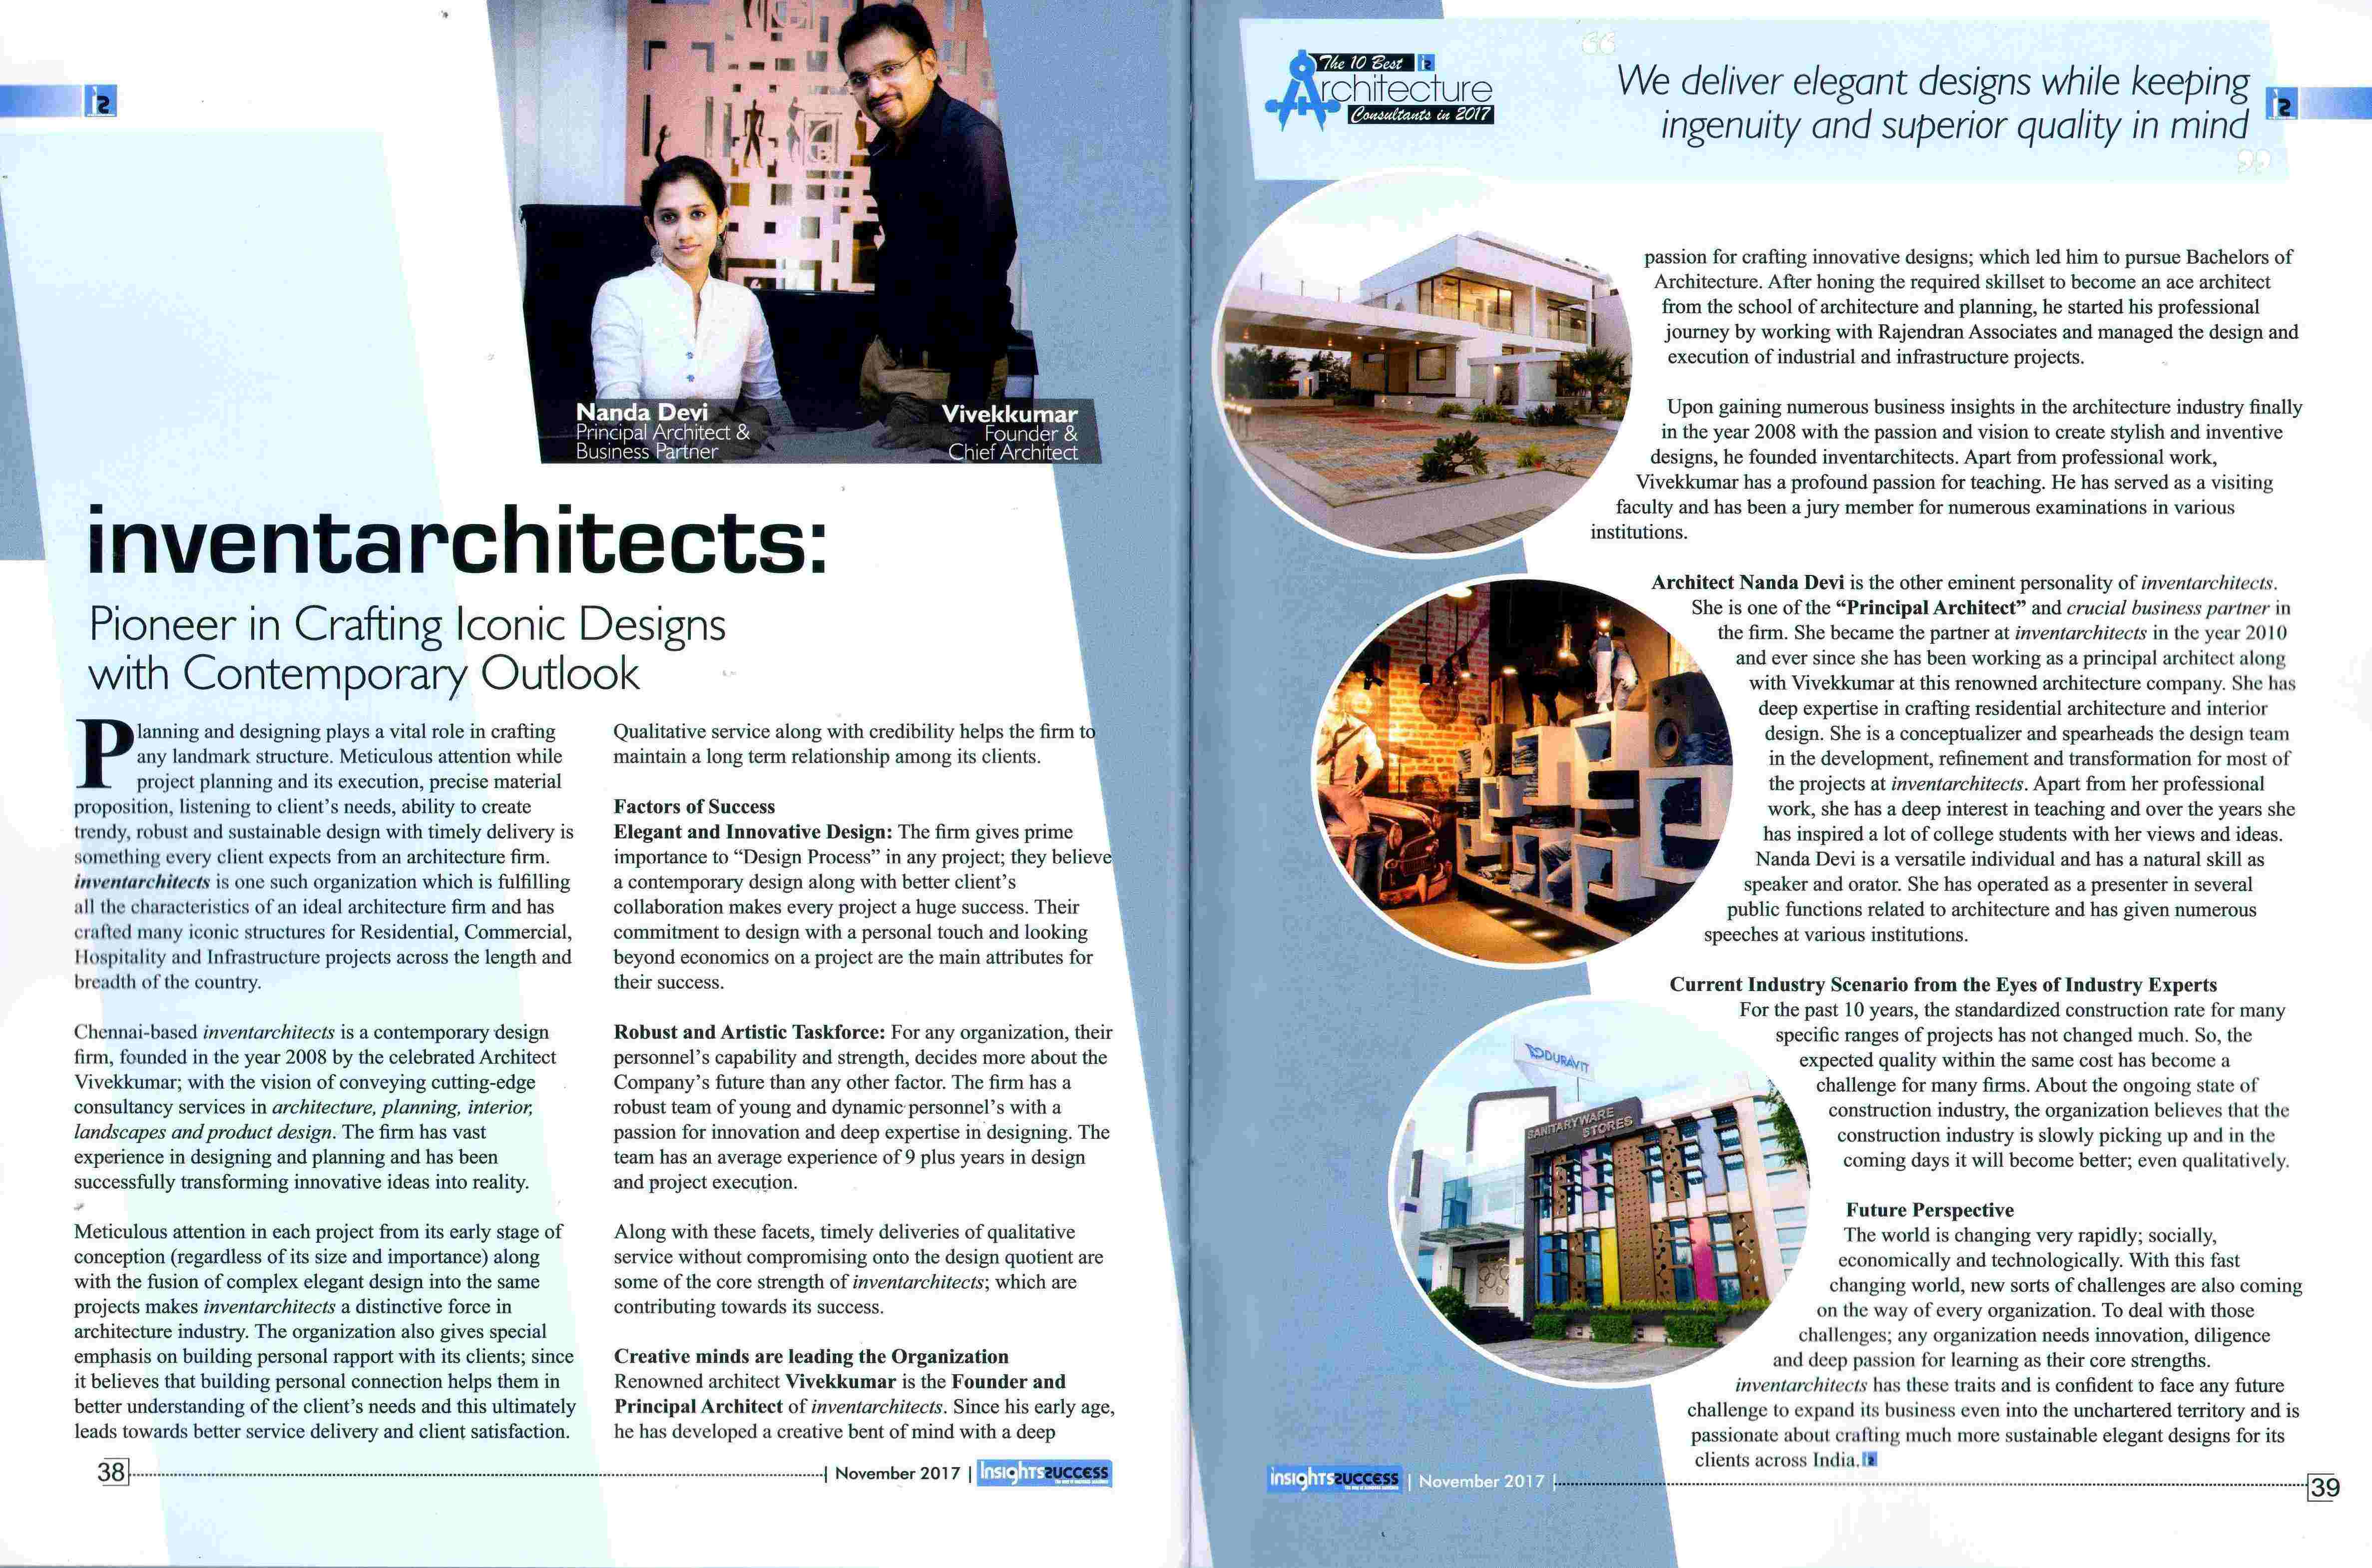  Pioneer in crafting iconic designs with contemporary outlook an article by Ar.Nandhadevi
      about inventarchitects